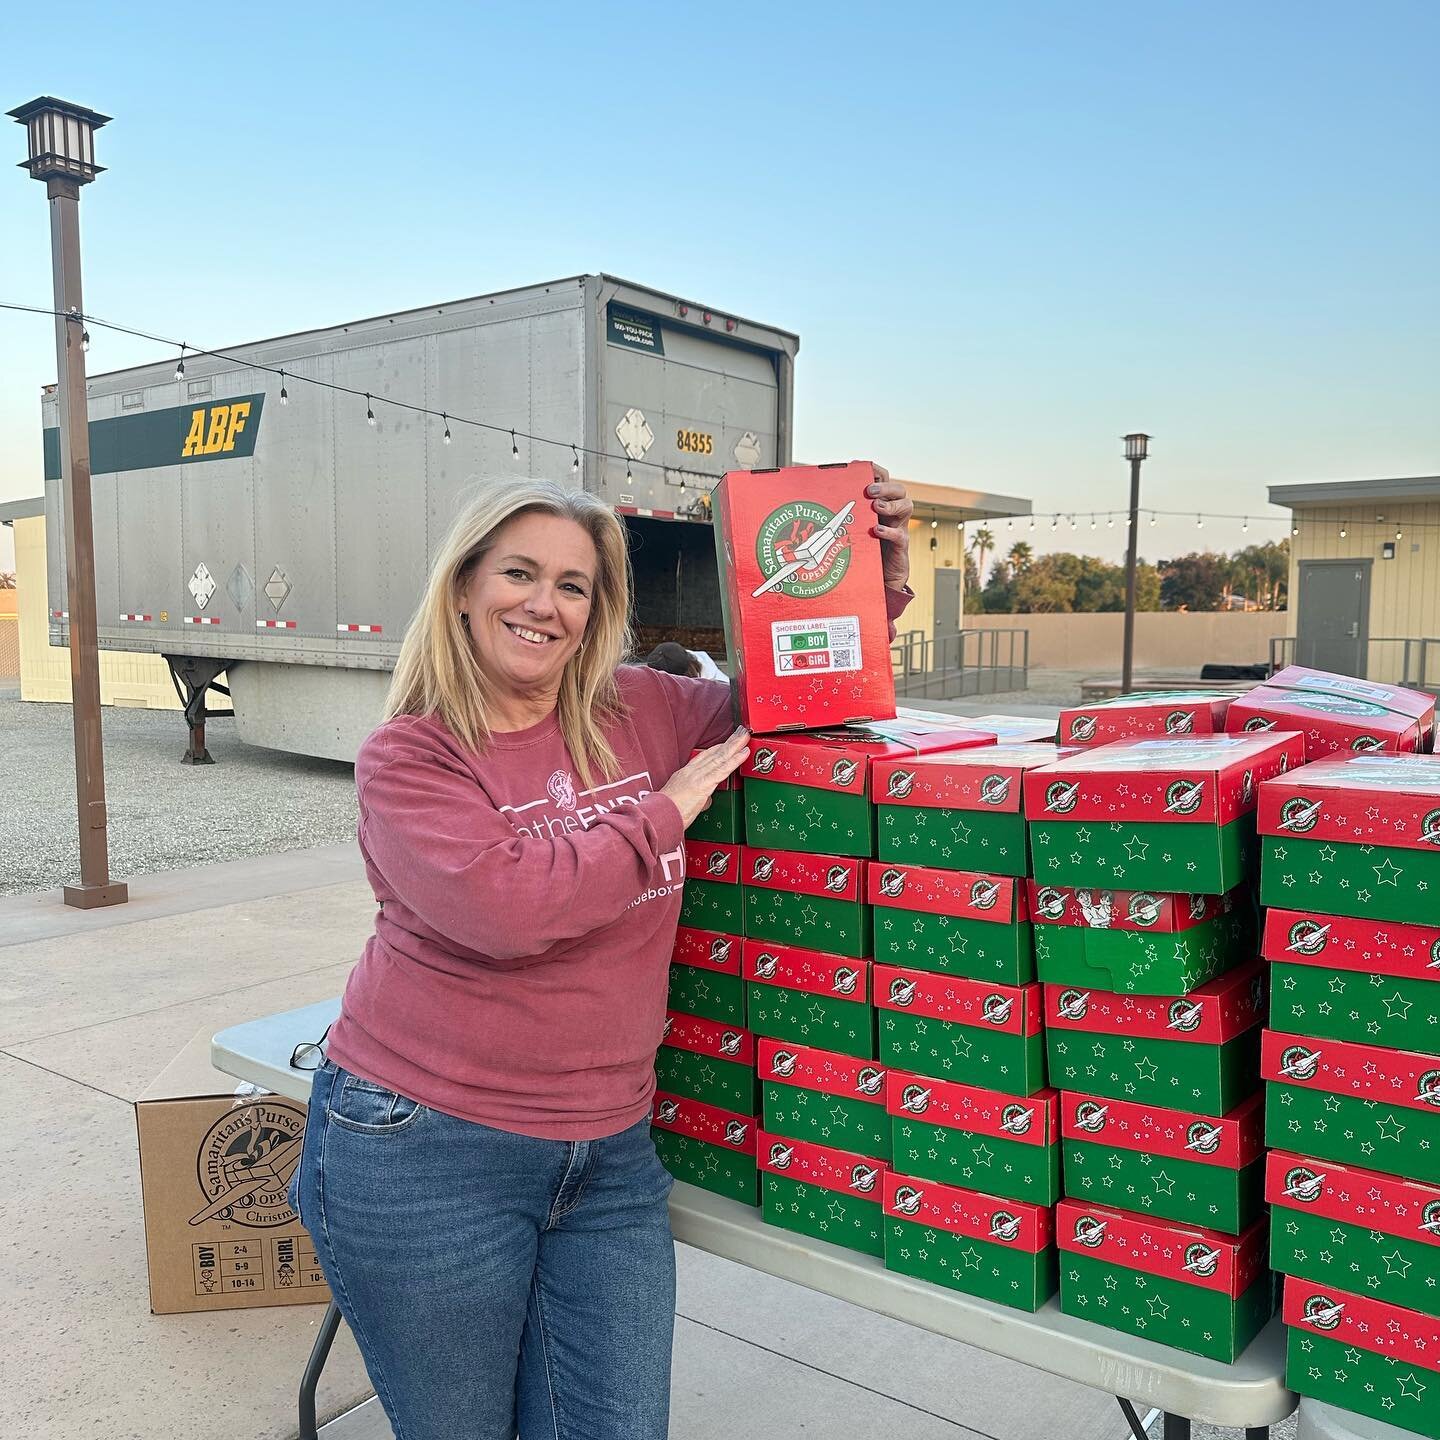 With your help, we will FILL this truck with thousands of these Operation Christmas Child shoeboxes! 

Help is needed:
Saturday 11/19 &amp; Sunday 11/20:  1pm &ndash; 4pm
Monday, 11/21:  12pm &ndash; 6pm

No need to sign up!  Just arrive and check in